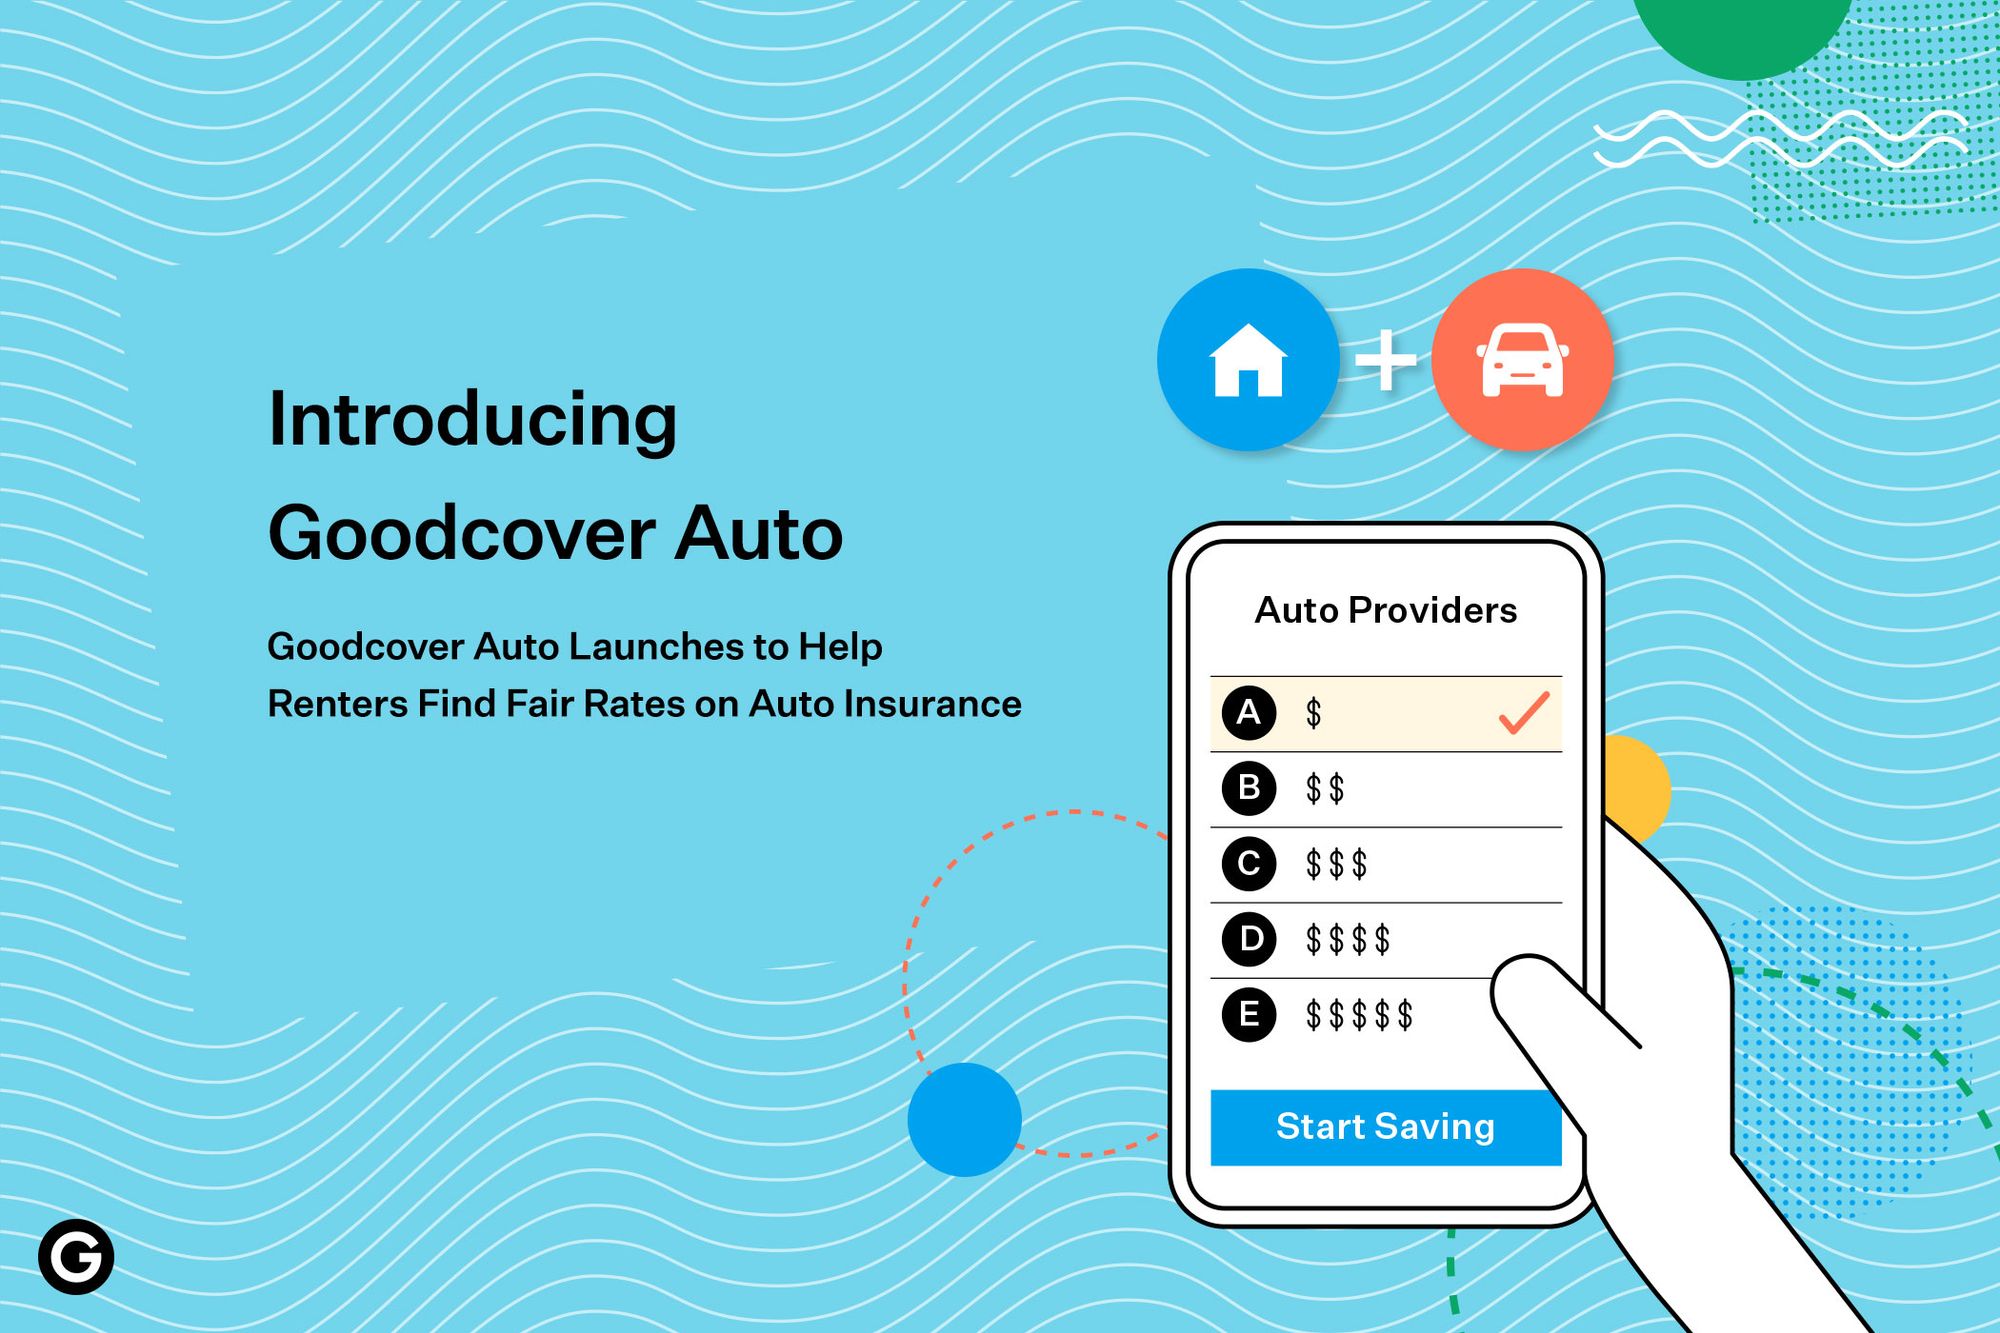 Goodcover Auto Launches to Help Renters Find Fair Rates on Auto Insurance